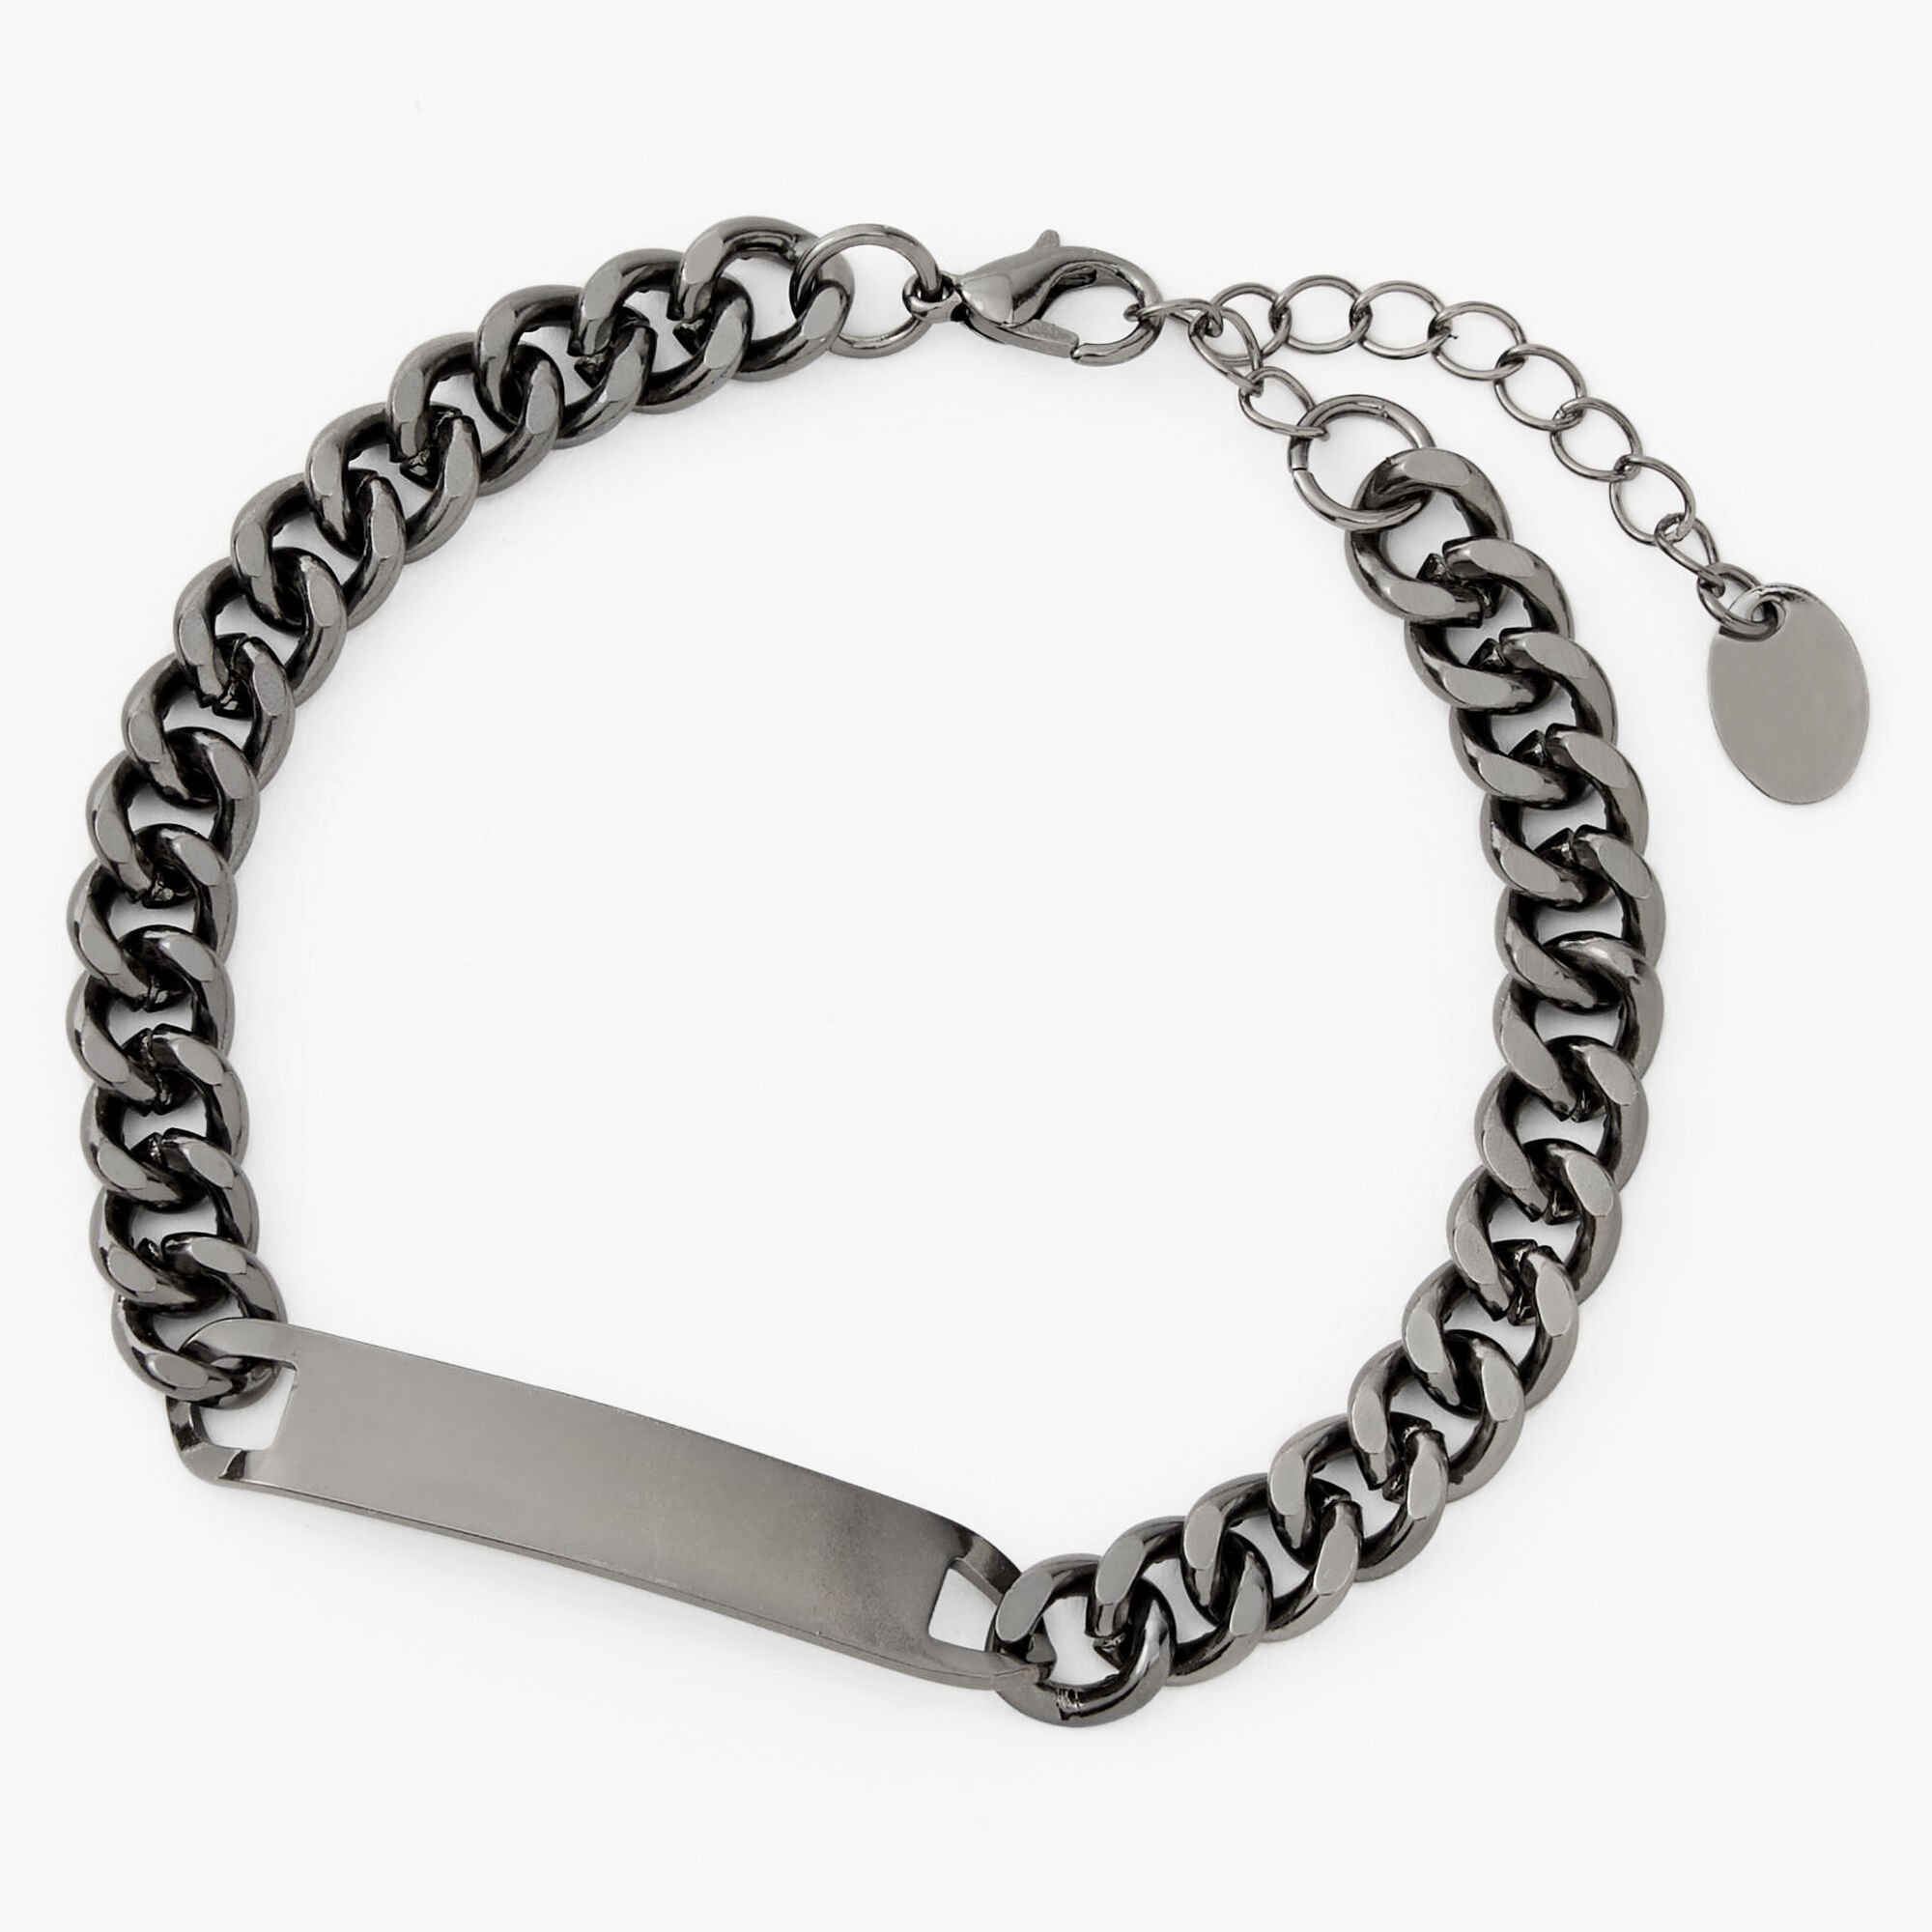 View Claires Hematite Chunky Chain Link Bracelet information